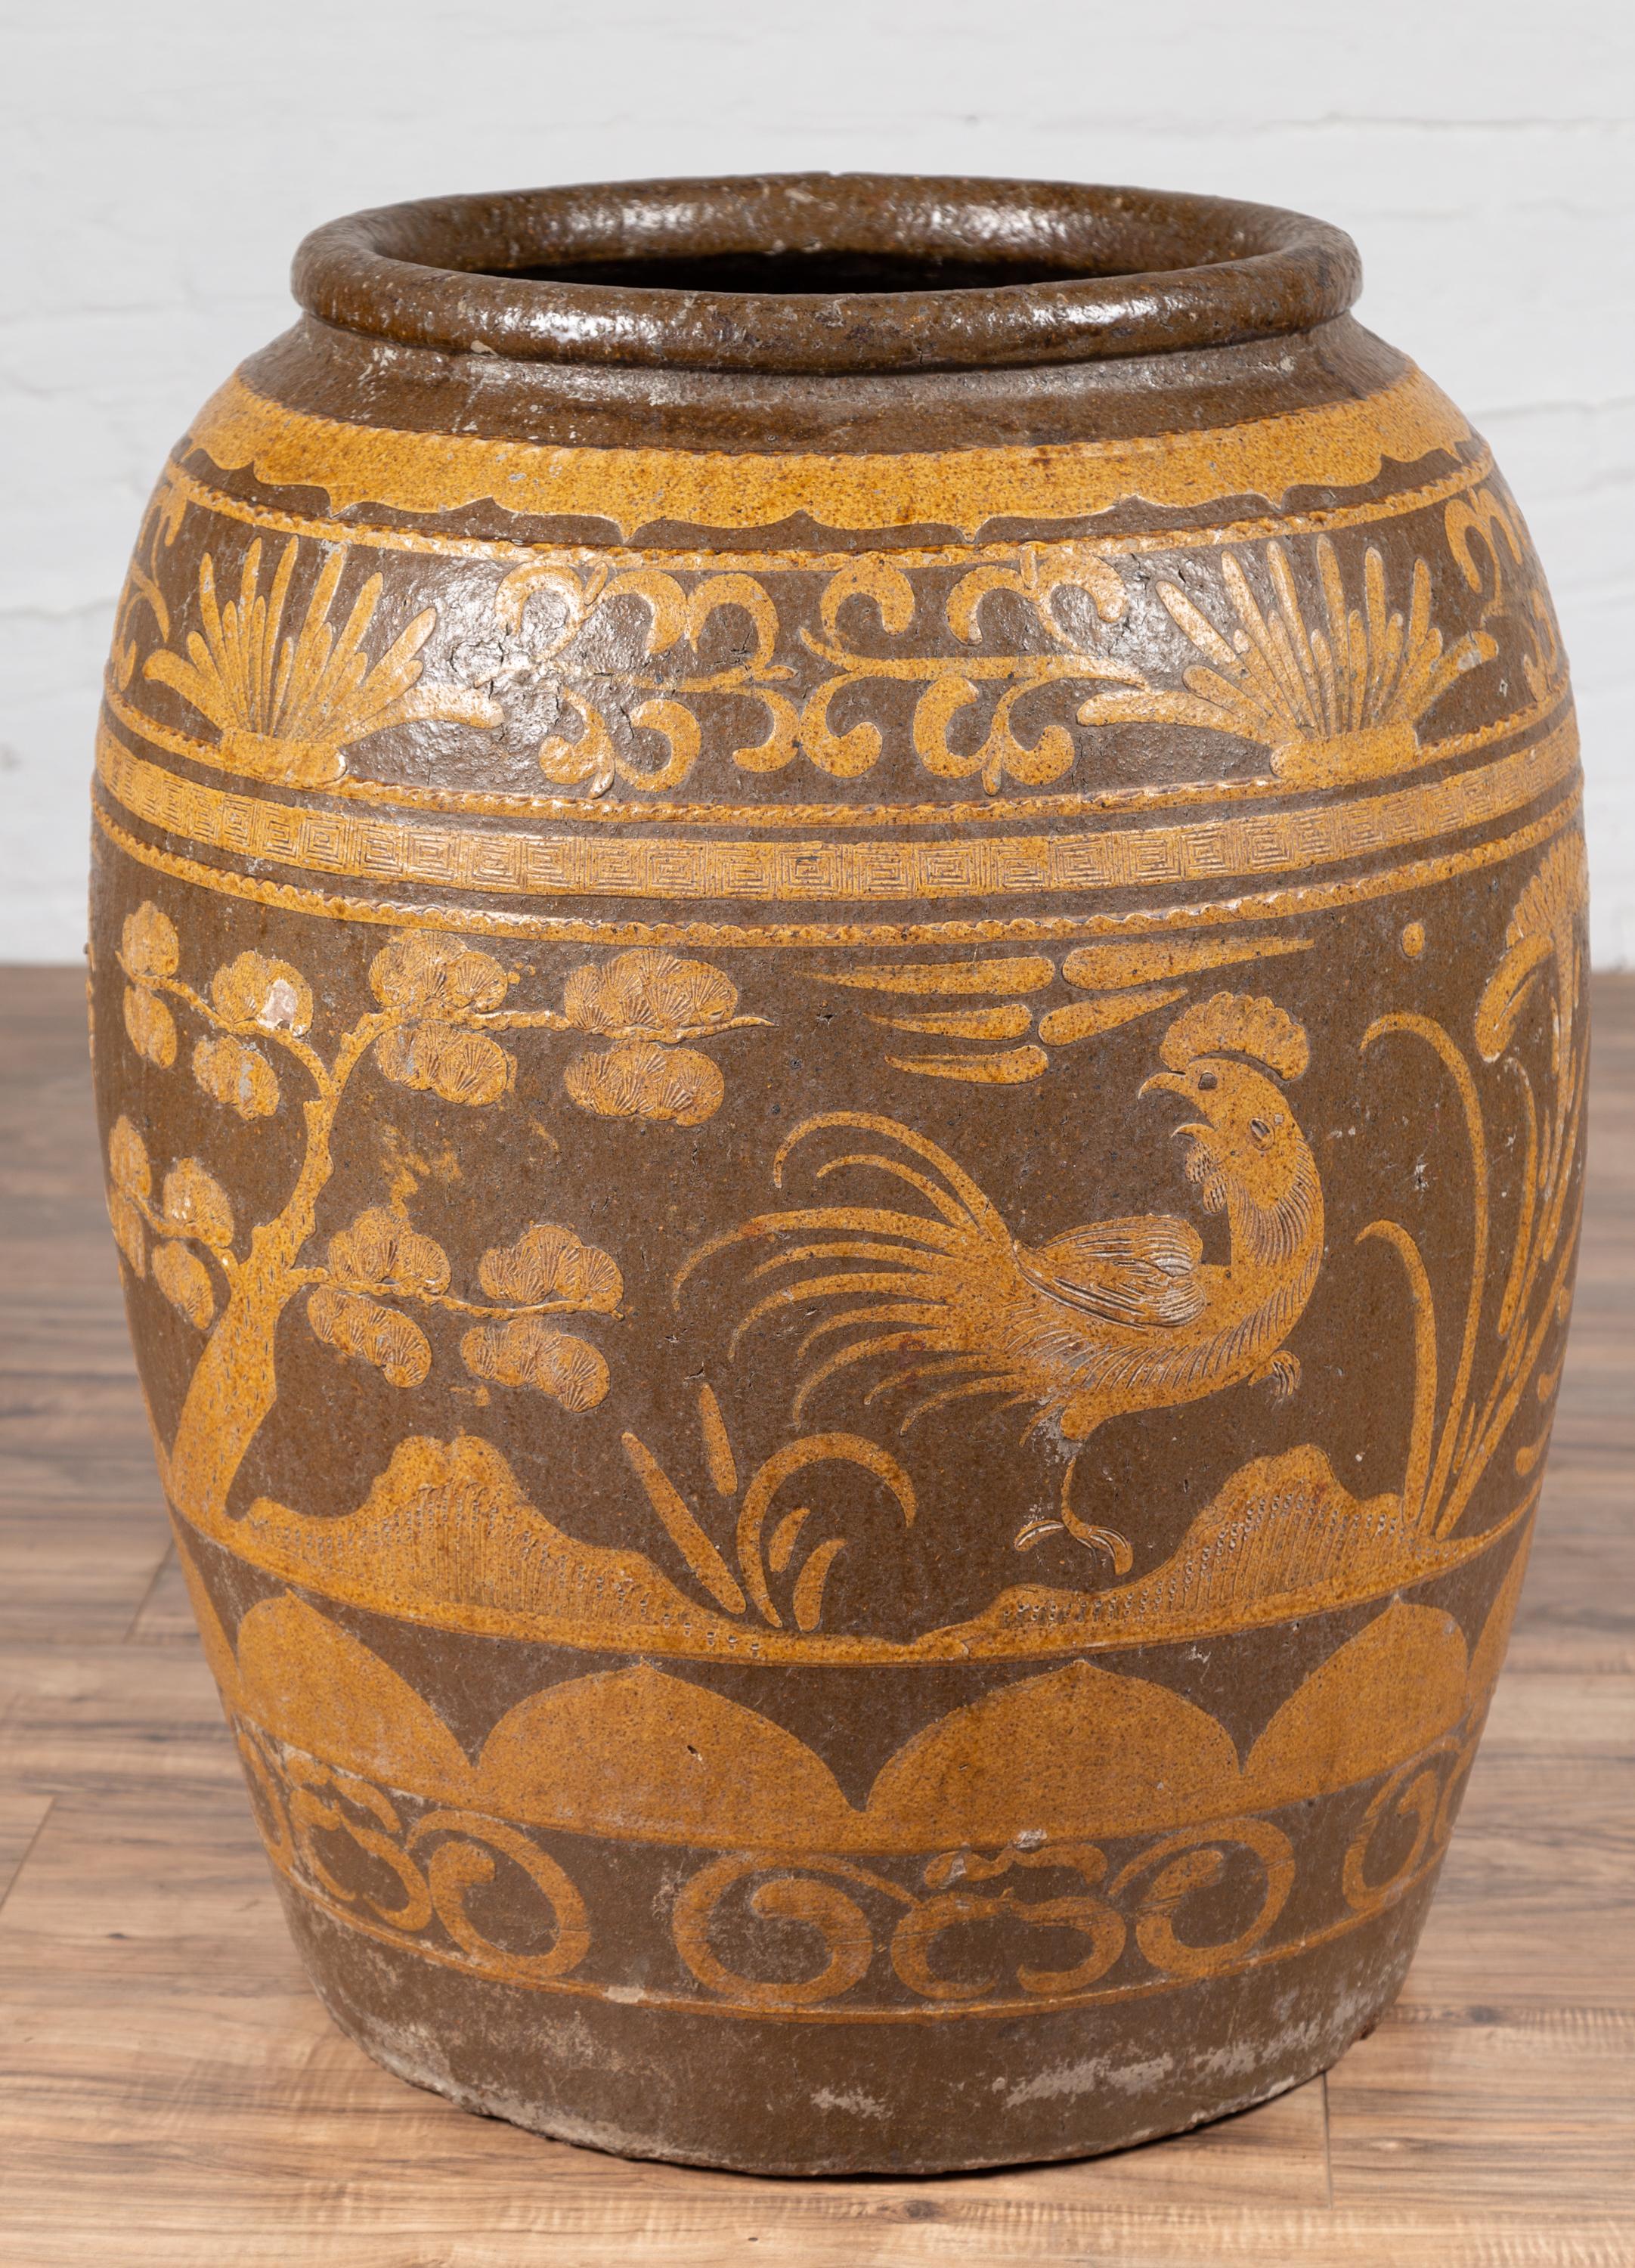 Large Chinese Antique Jar with Mustard Glaze, Bird and Floral Motifs, circa 1900 For Sale 4